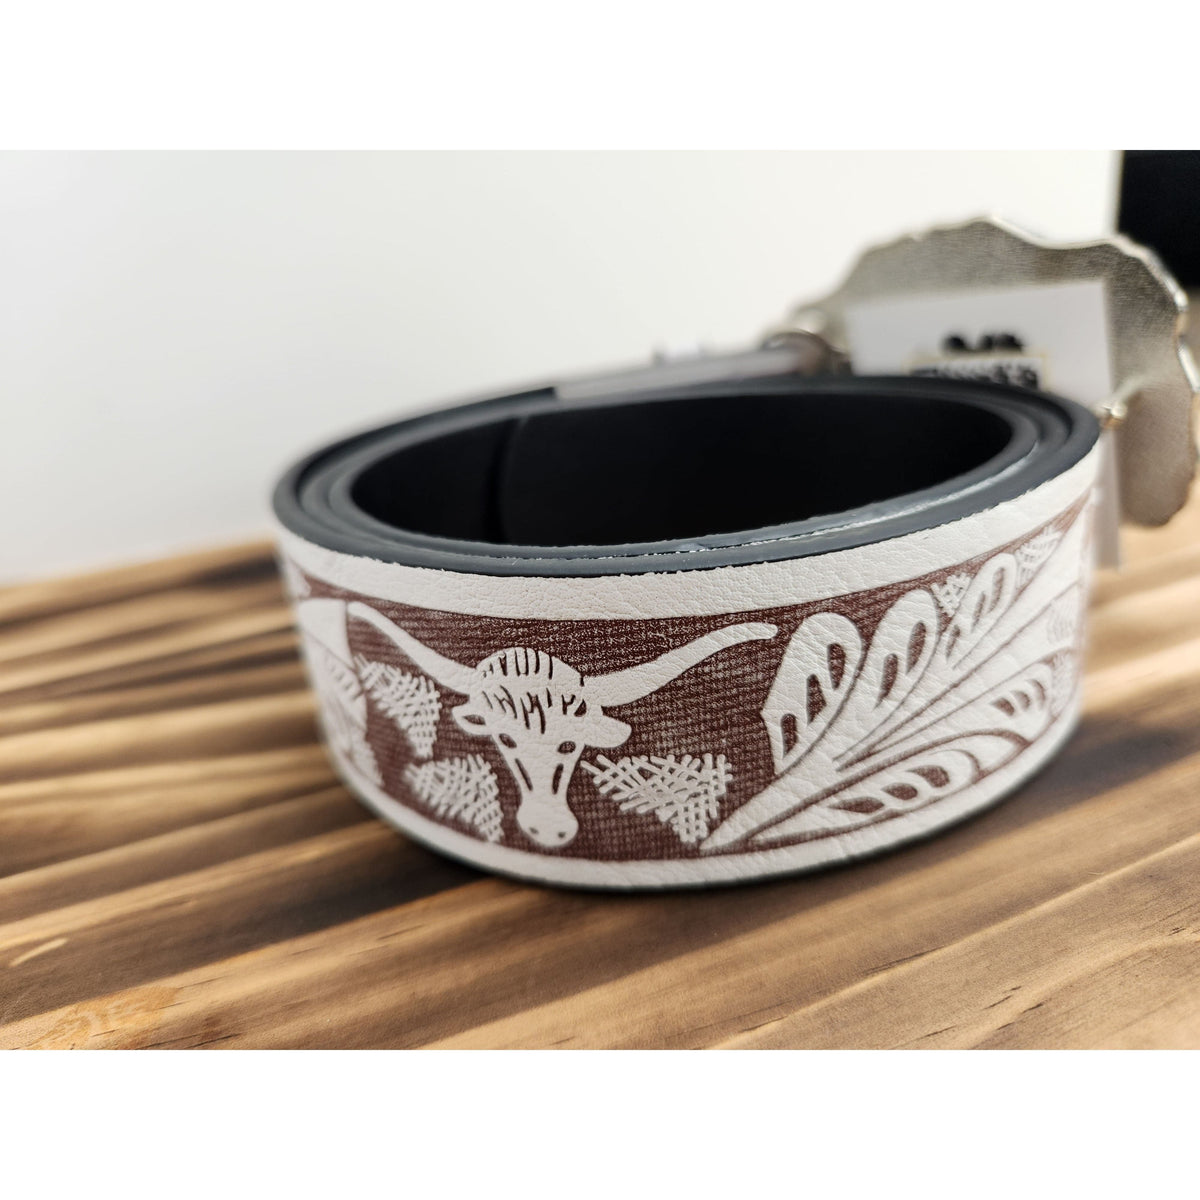 Bull Rider Belt with Buckle TheFringeCultureCollective